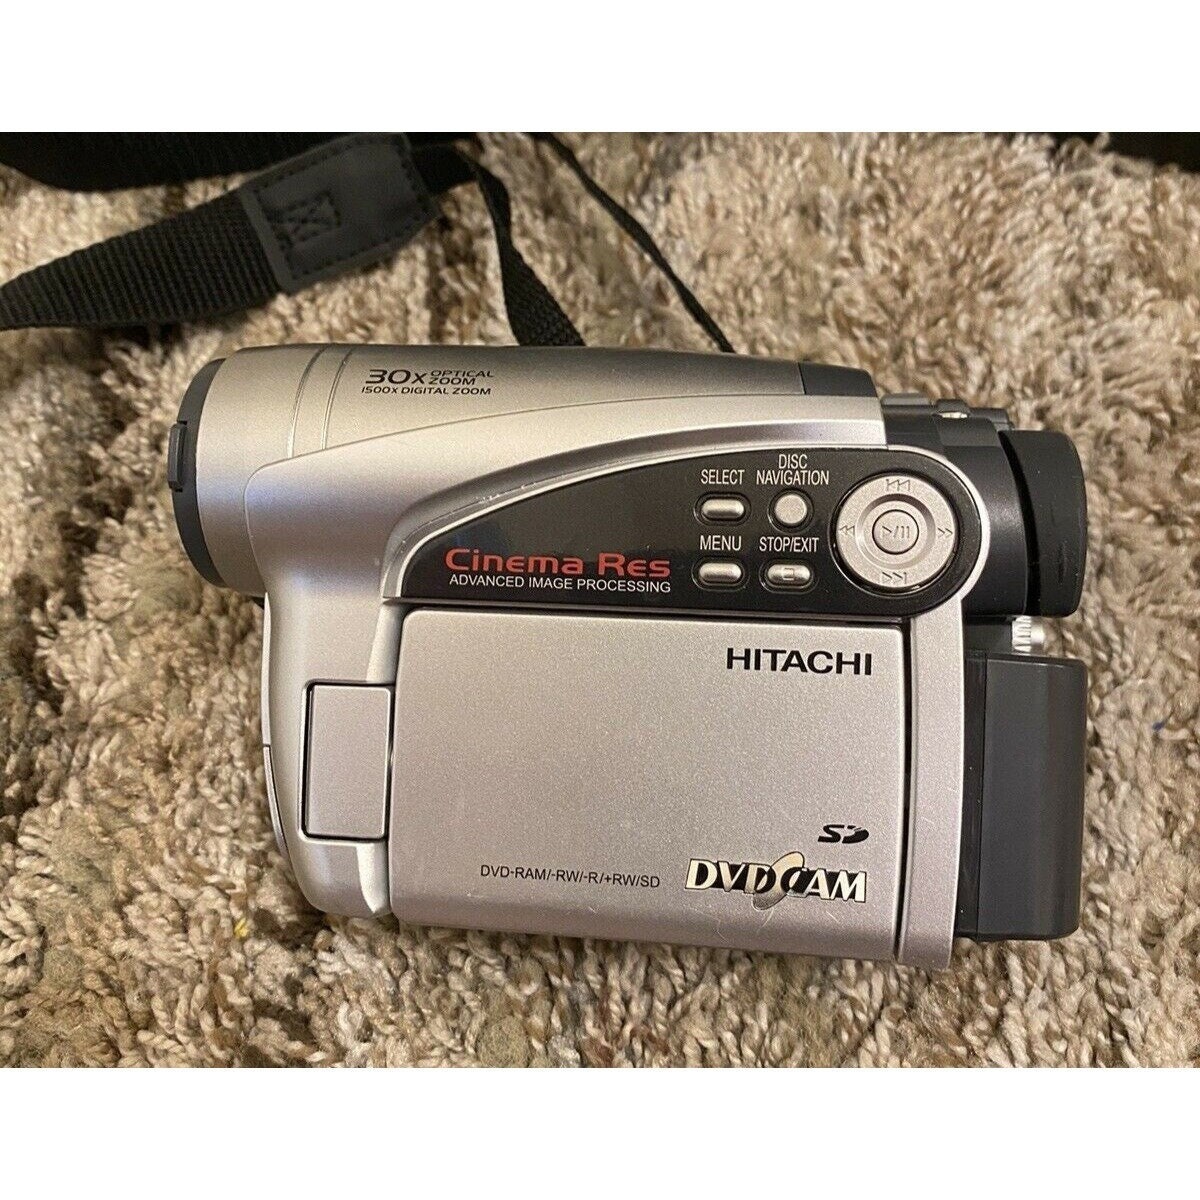 Sony DCR-SX44 Handycam 60X Optical Zoom Digital Video Camera & Charger Tested